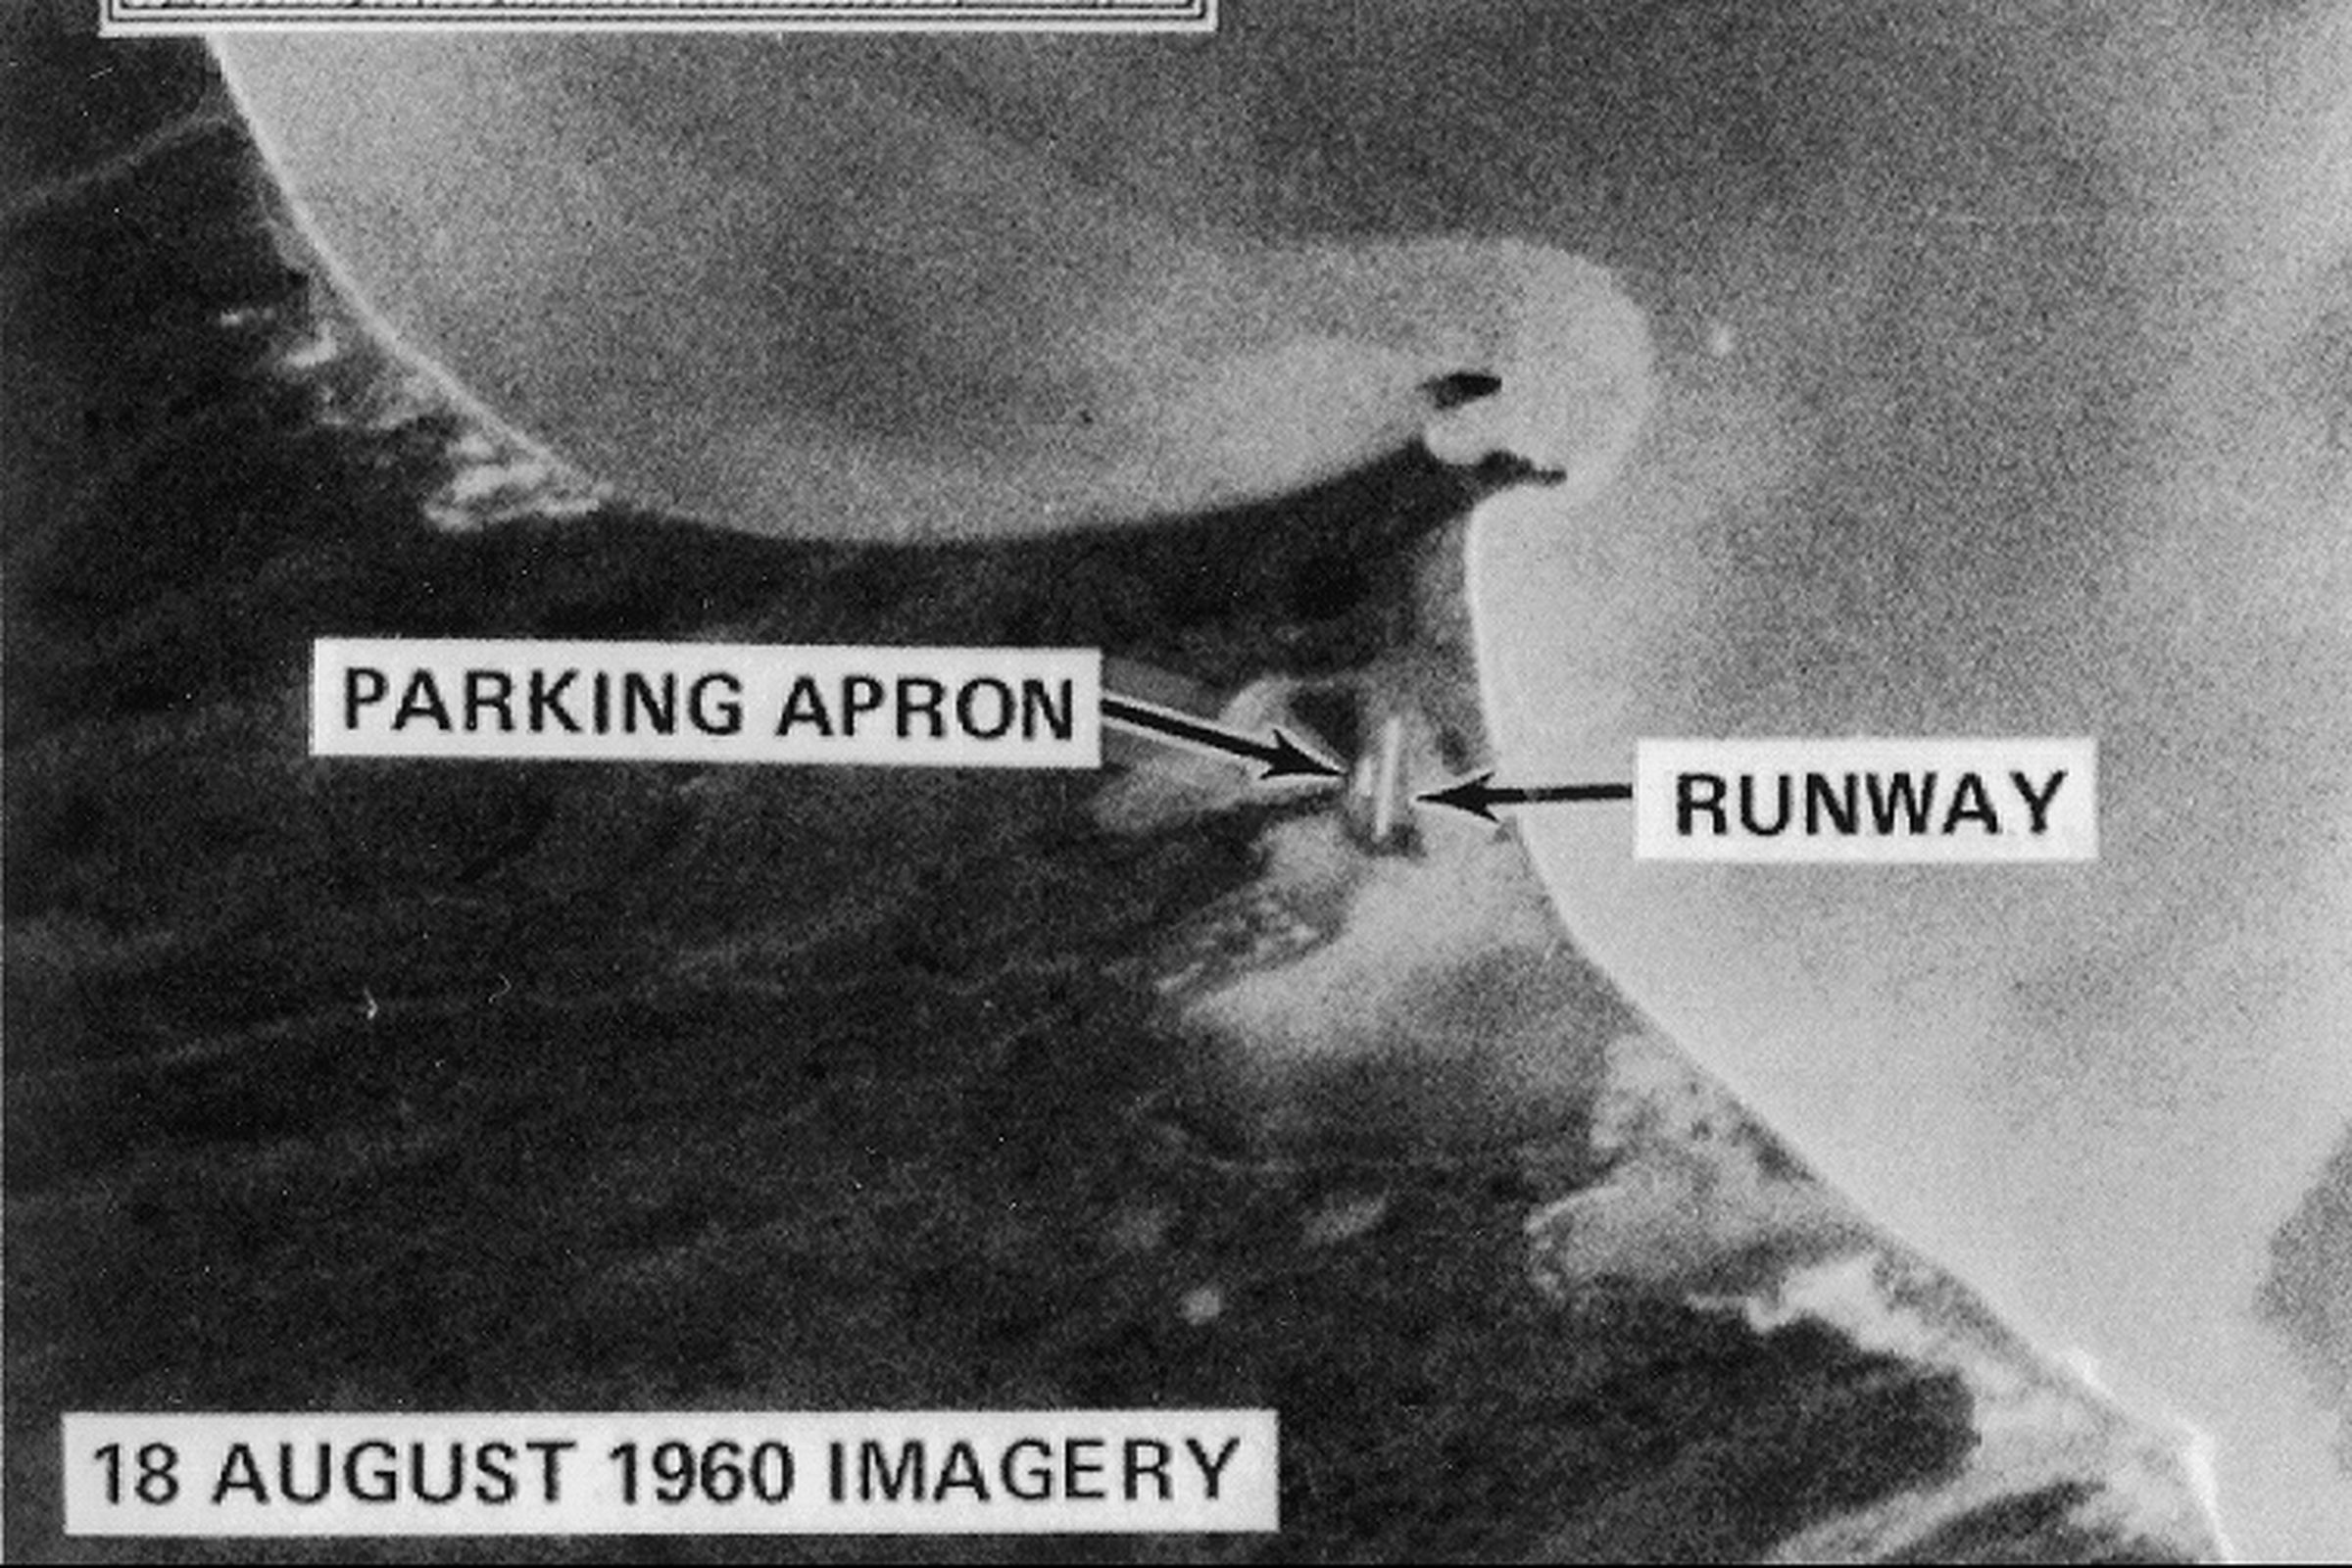 A black and white satellite photo of an area in Russia, with text that says “18 August 1960 Imagery.” There are arrows pointing to areas that say “Parking Apron” and “Runway.”